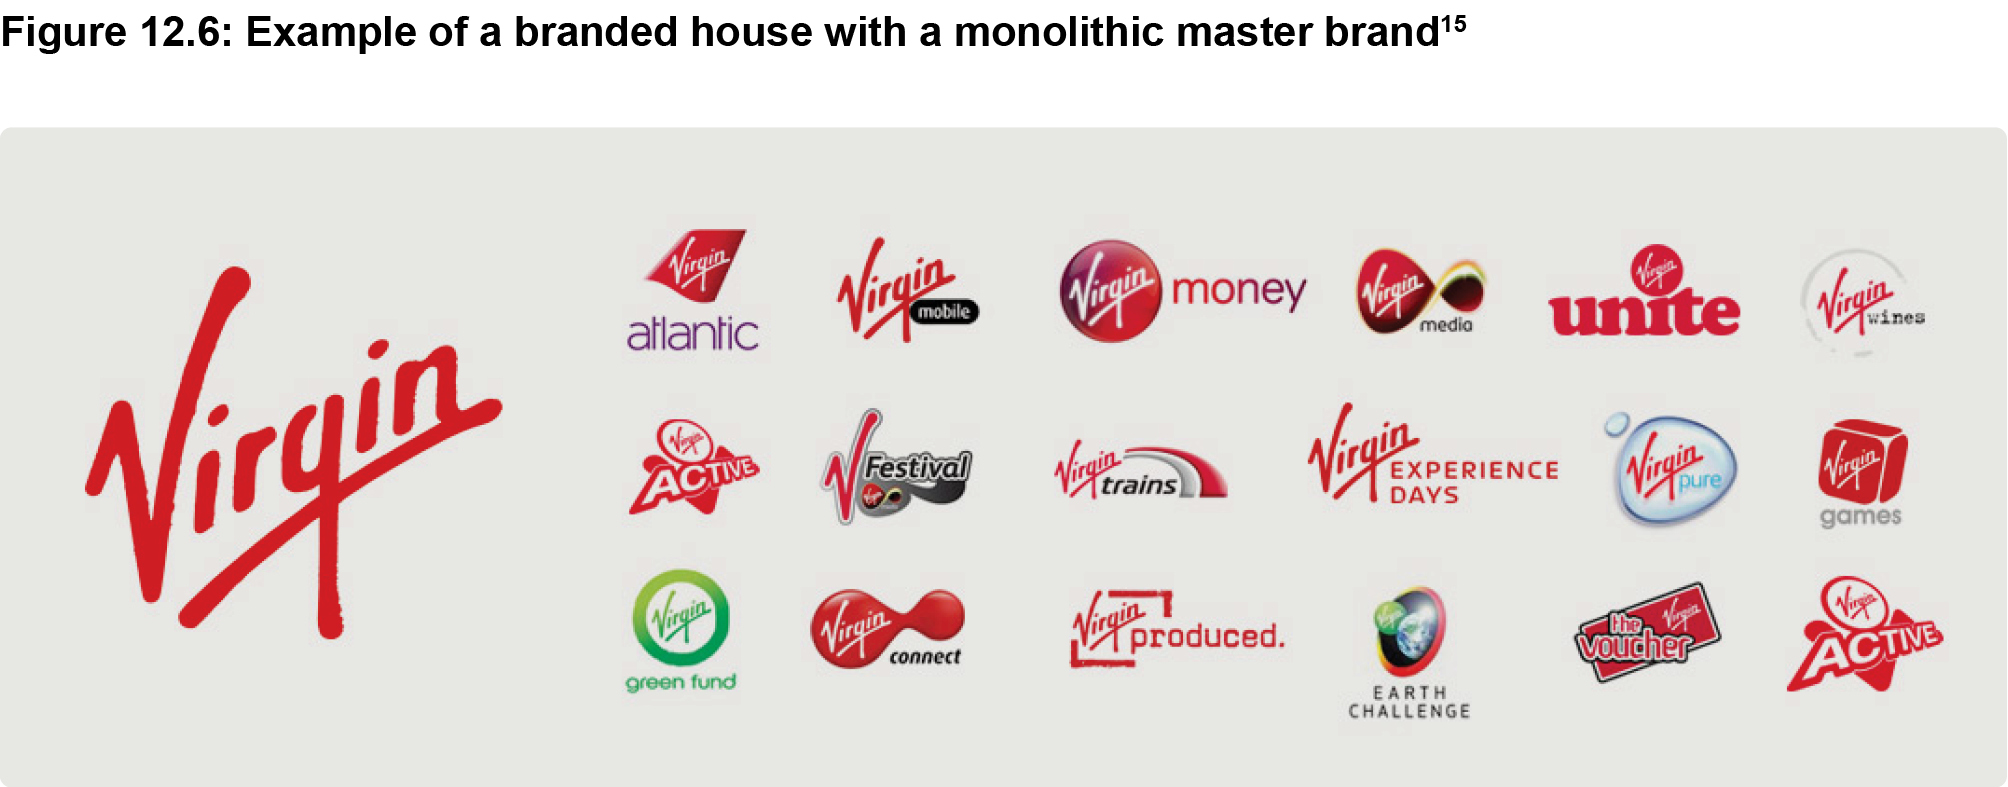 Figure 12.6: Example of a branded house with a monolithic master brand